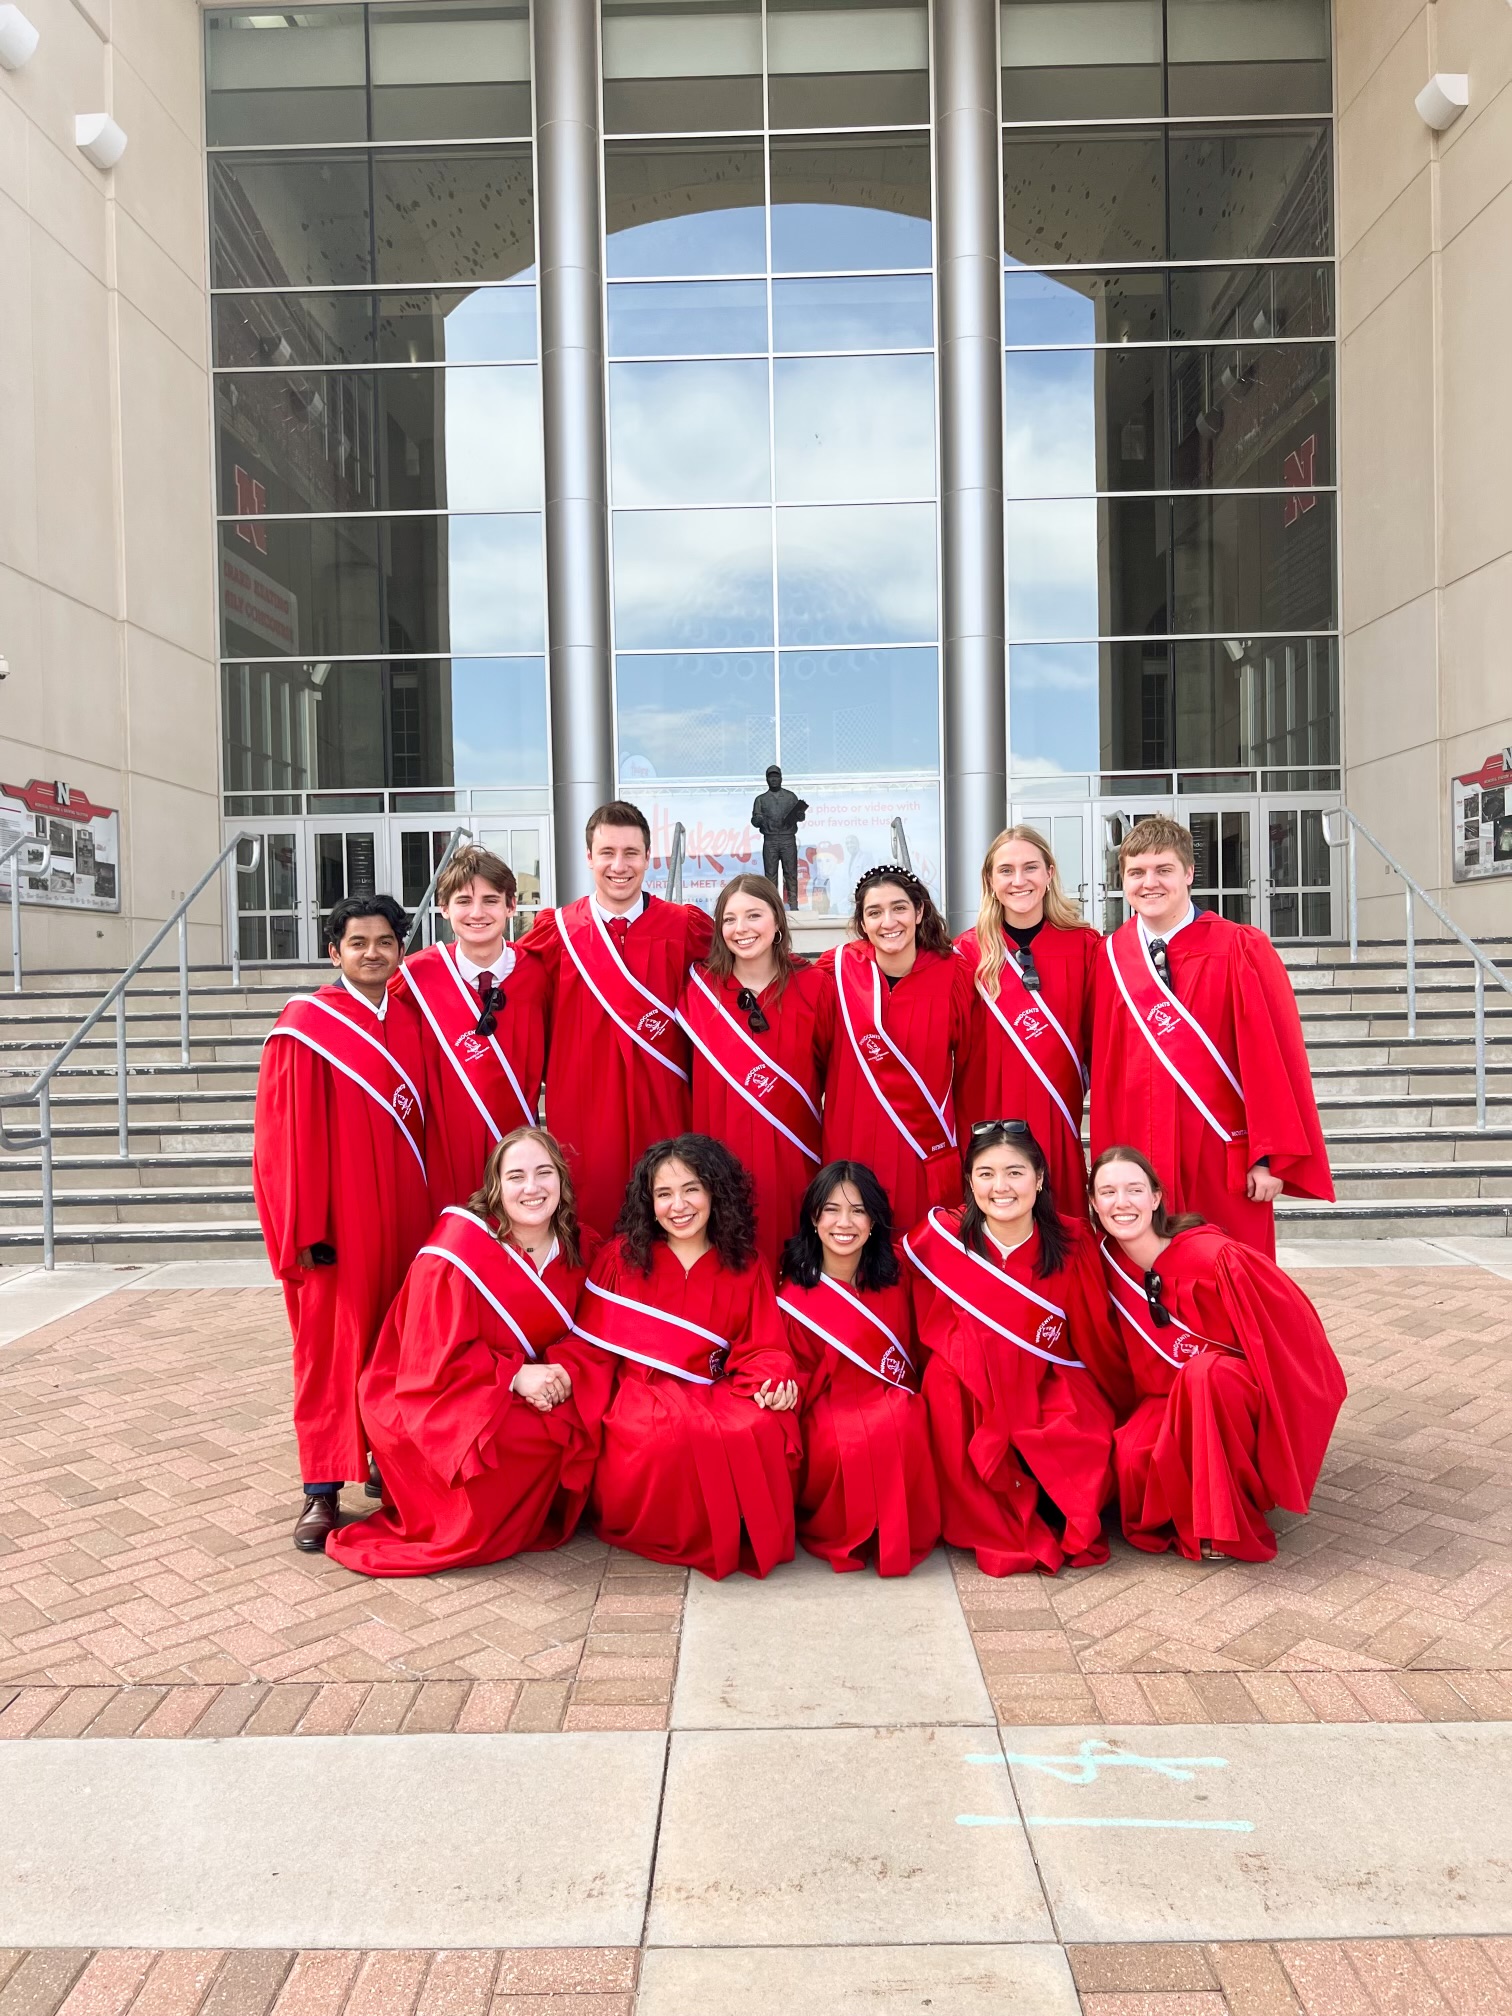 Twelve college students in red robes with red sashes pose on the plaza east of Memorial Stadium.